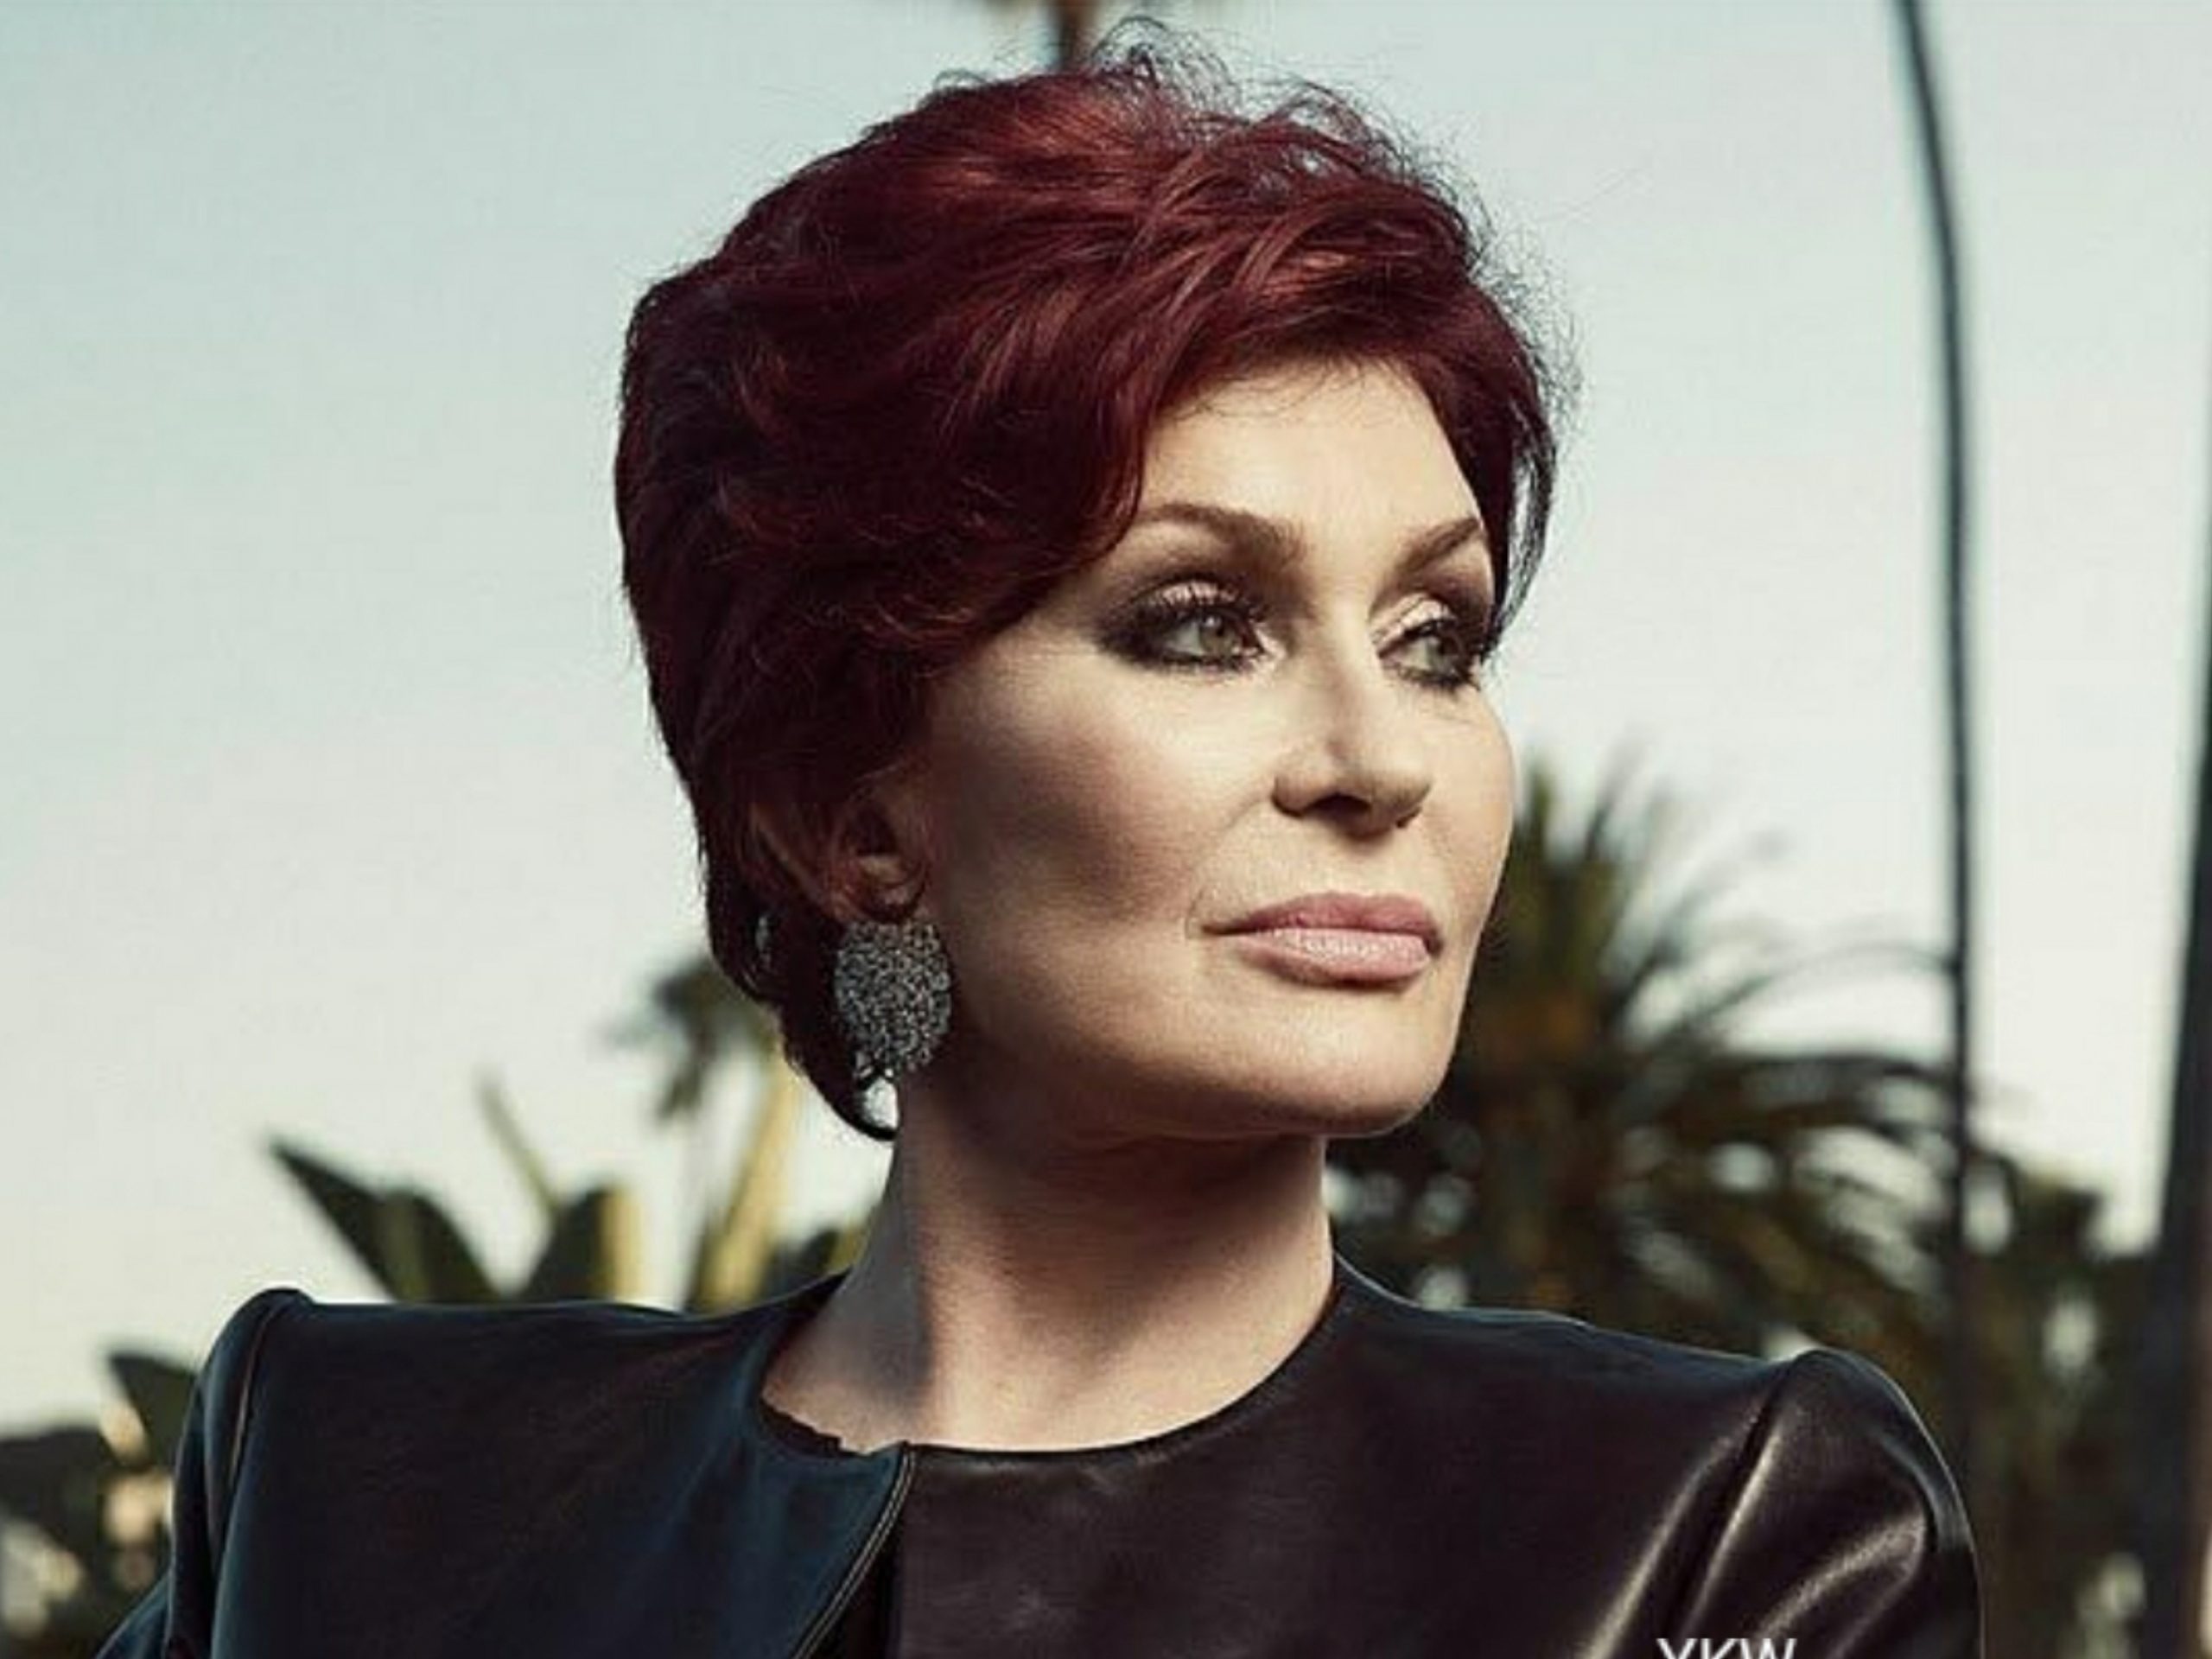 Sharon Osbourne Will Not Be Returning To “The Talk”